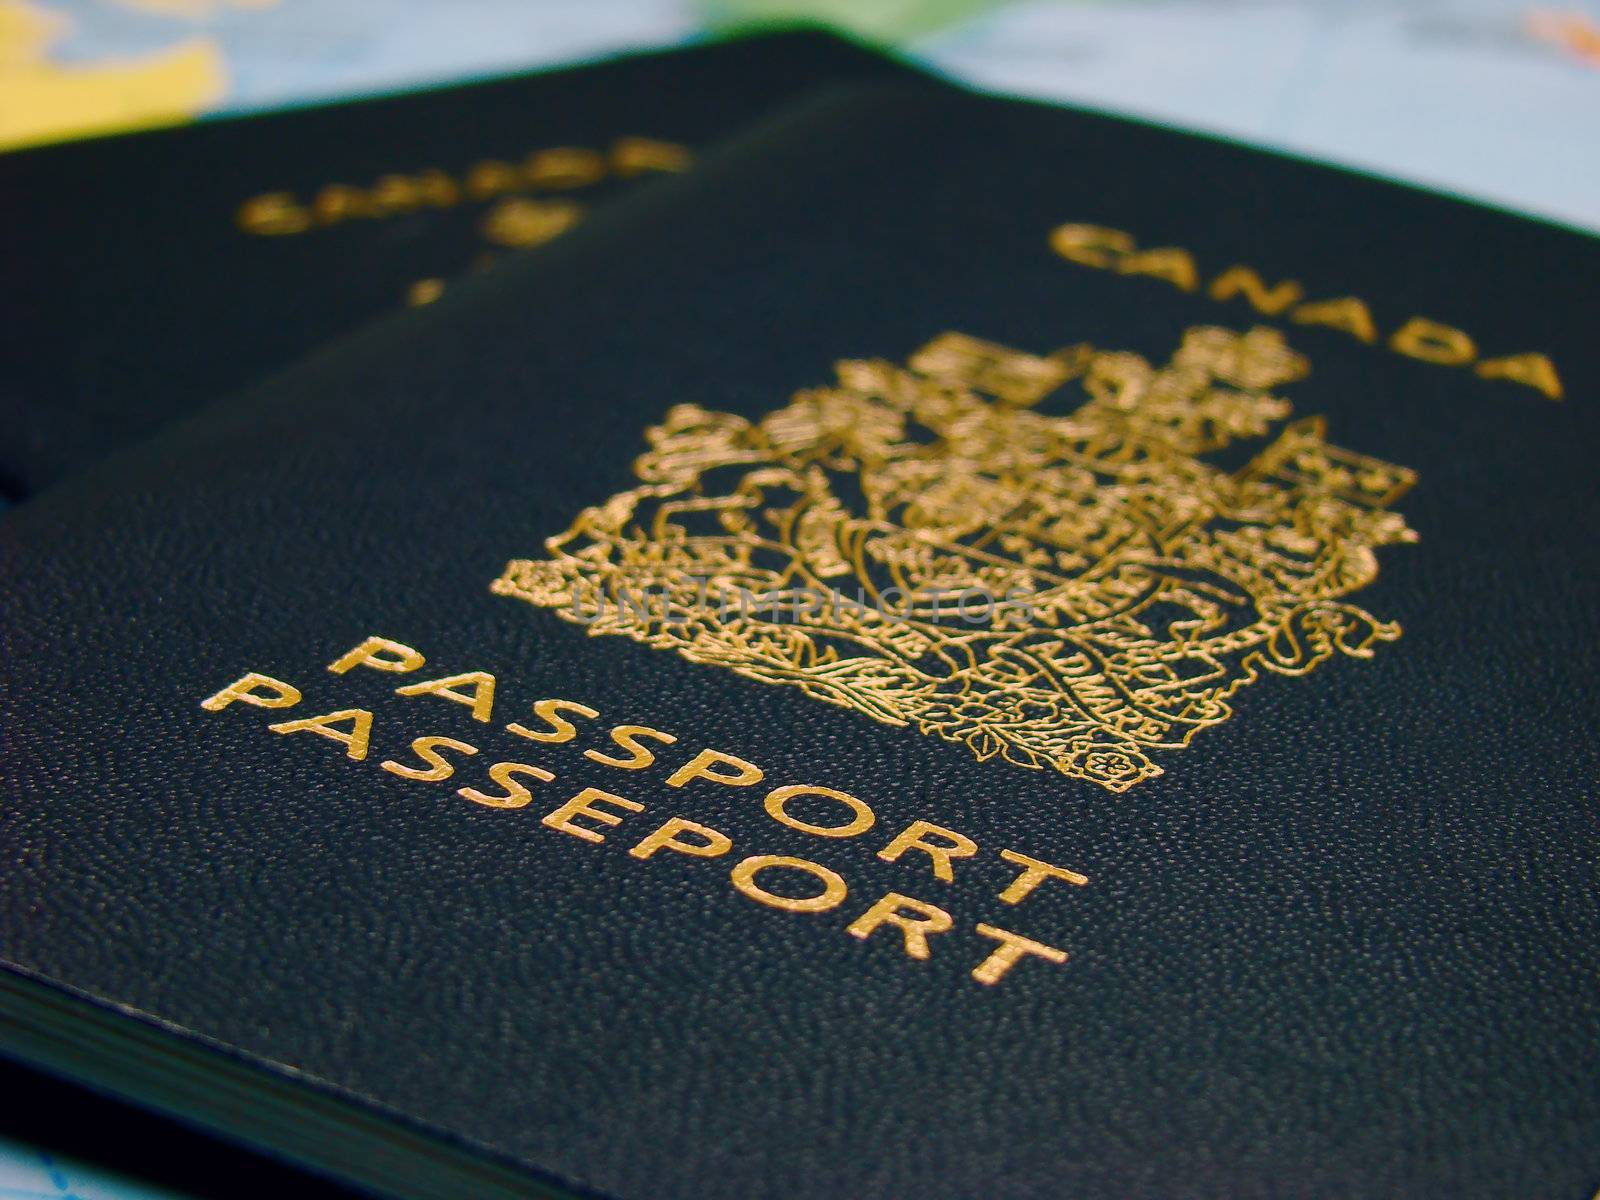 Two Canadian passports against map (bilingual English and French).